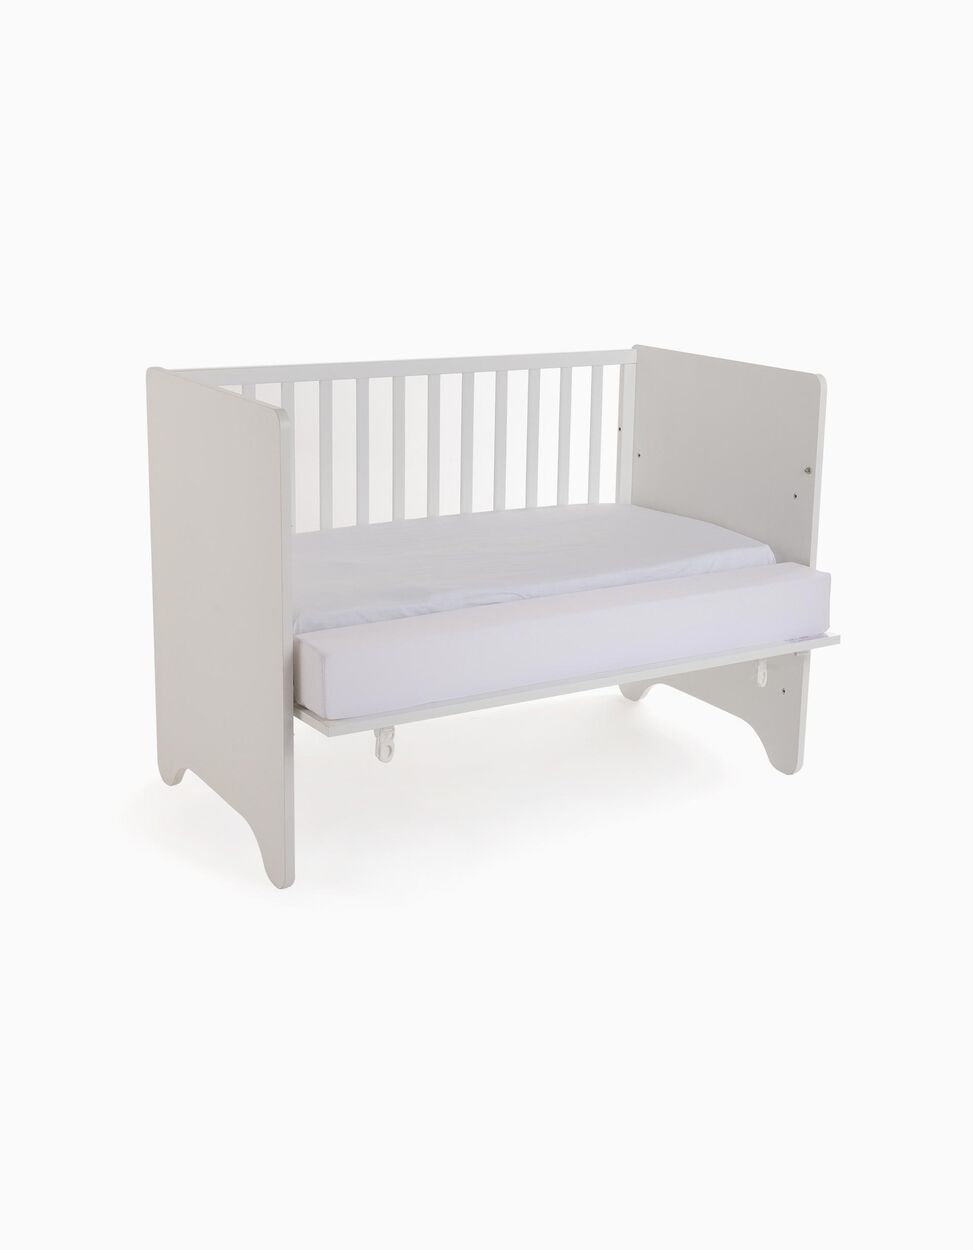 5-in-1 Cot, 120x60 cm by Zy Baby